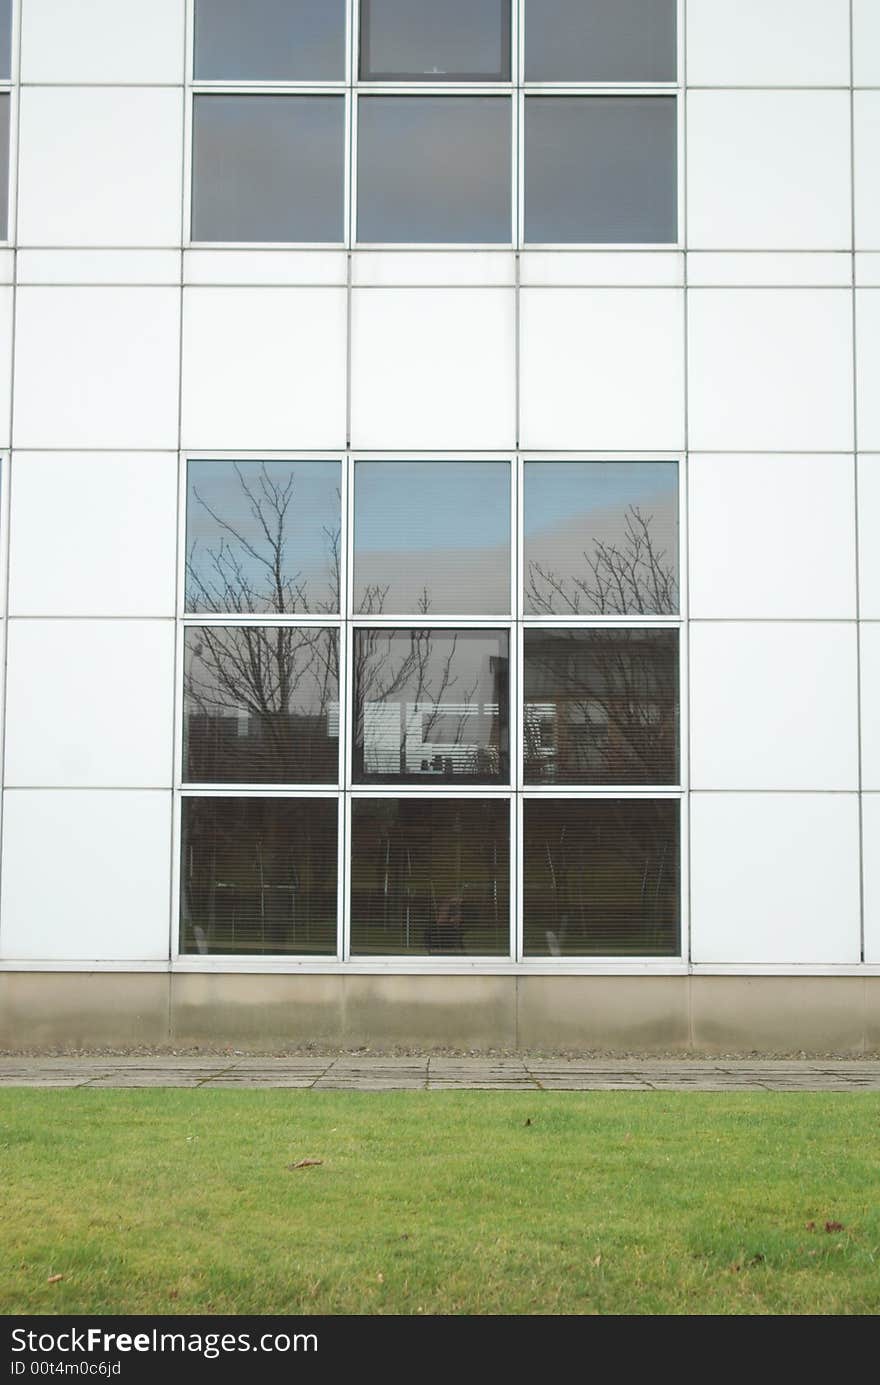 Shot of an office building with tree reflection. Shot of an office building with tree reflection.